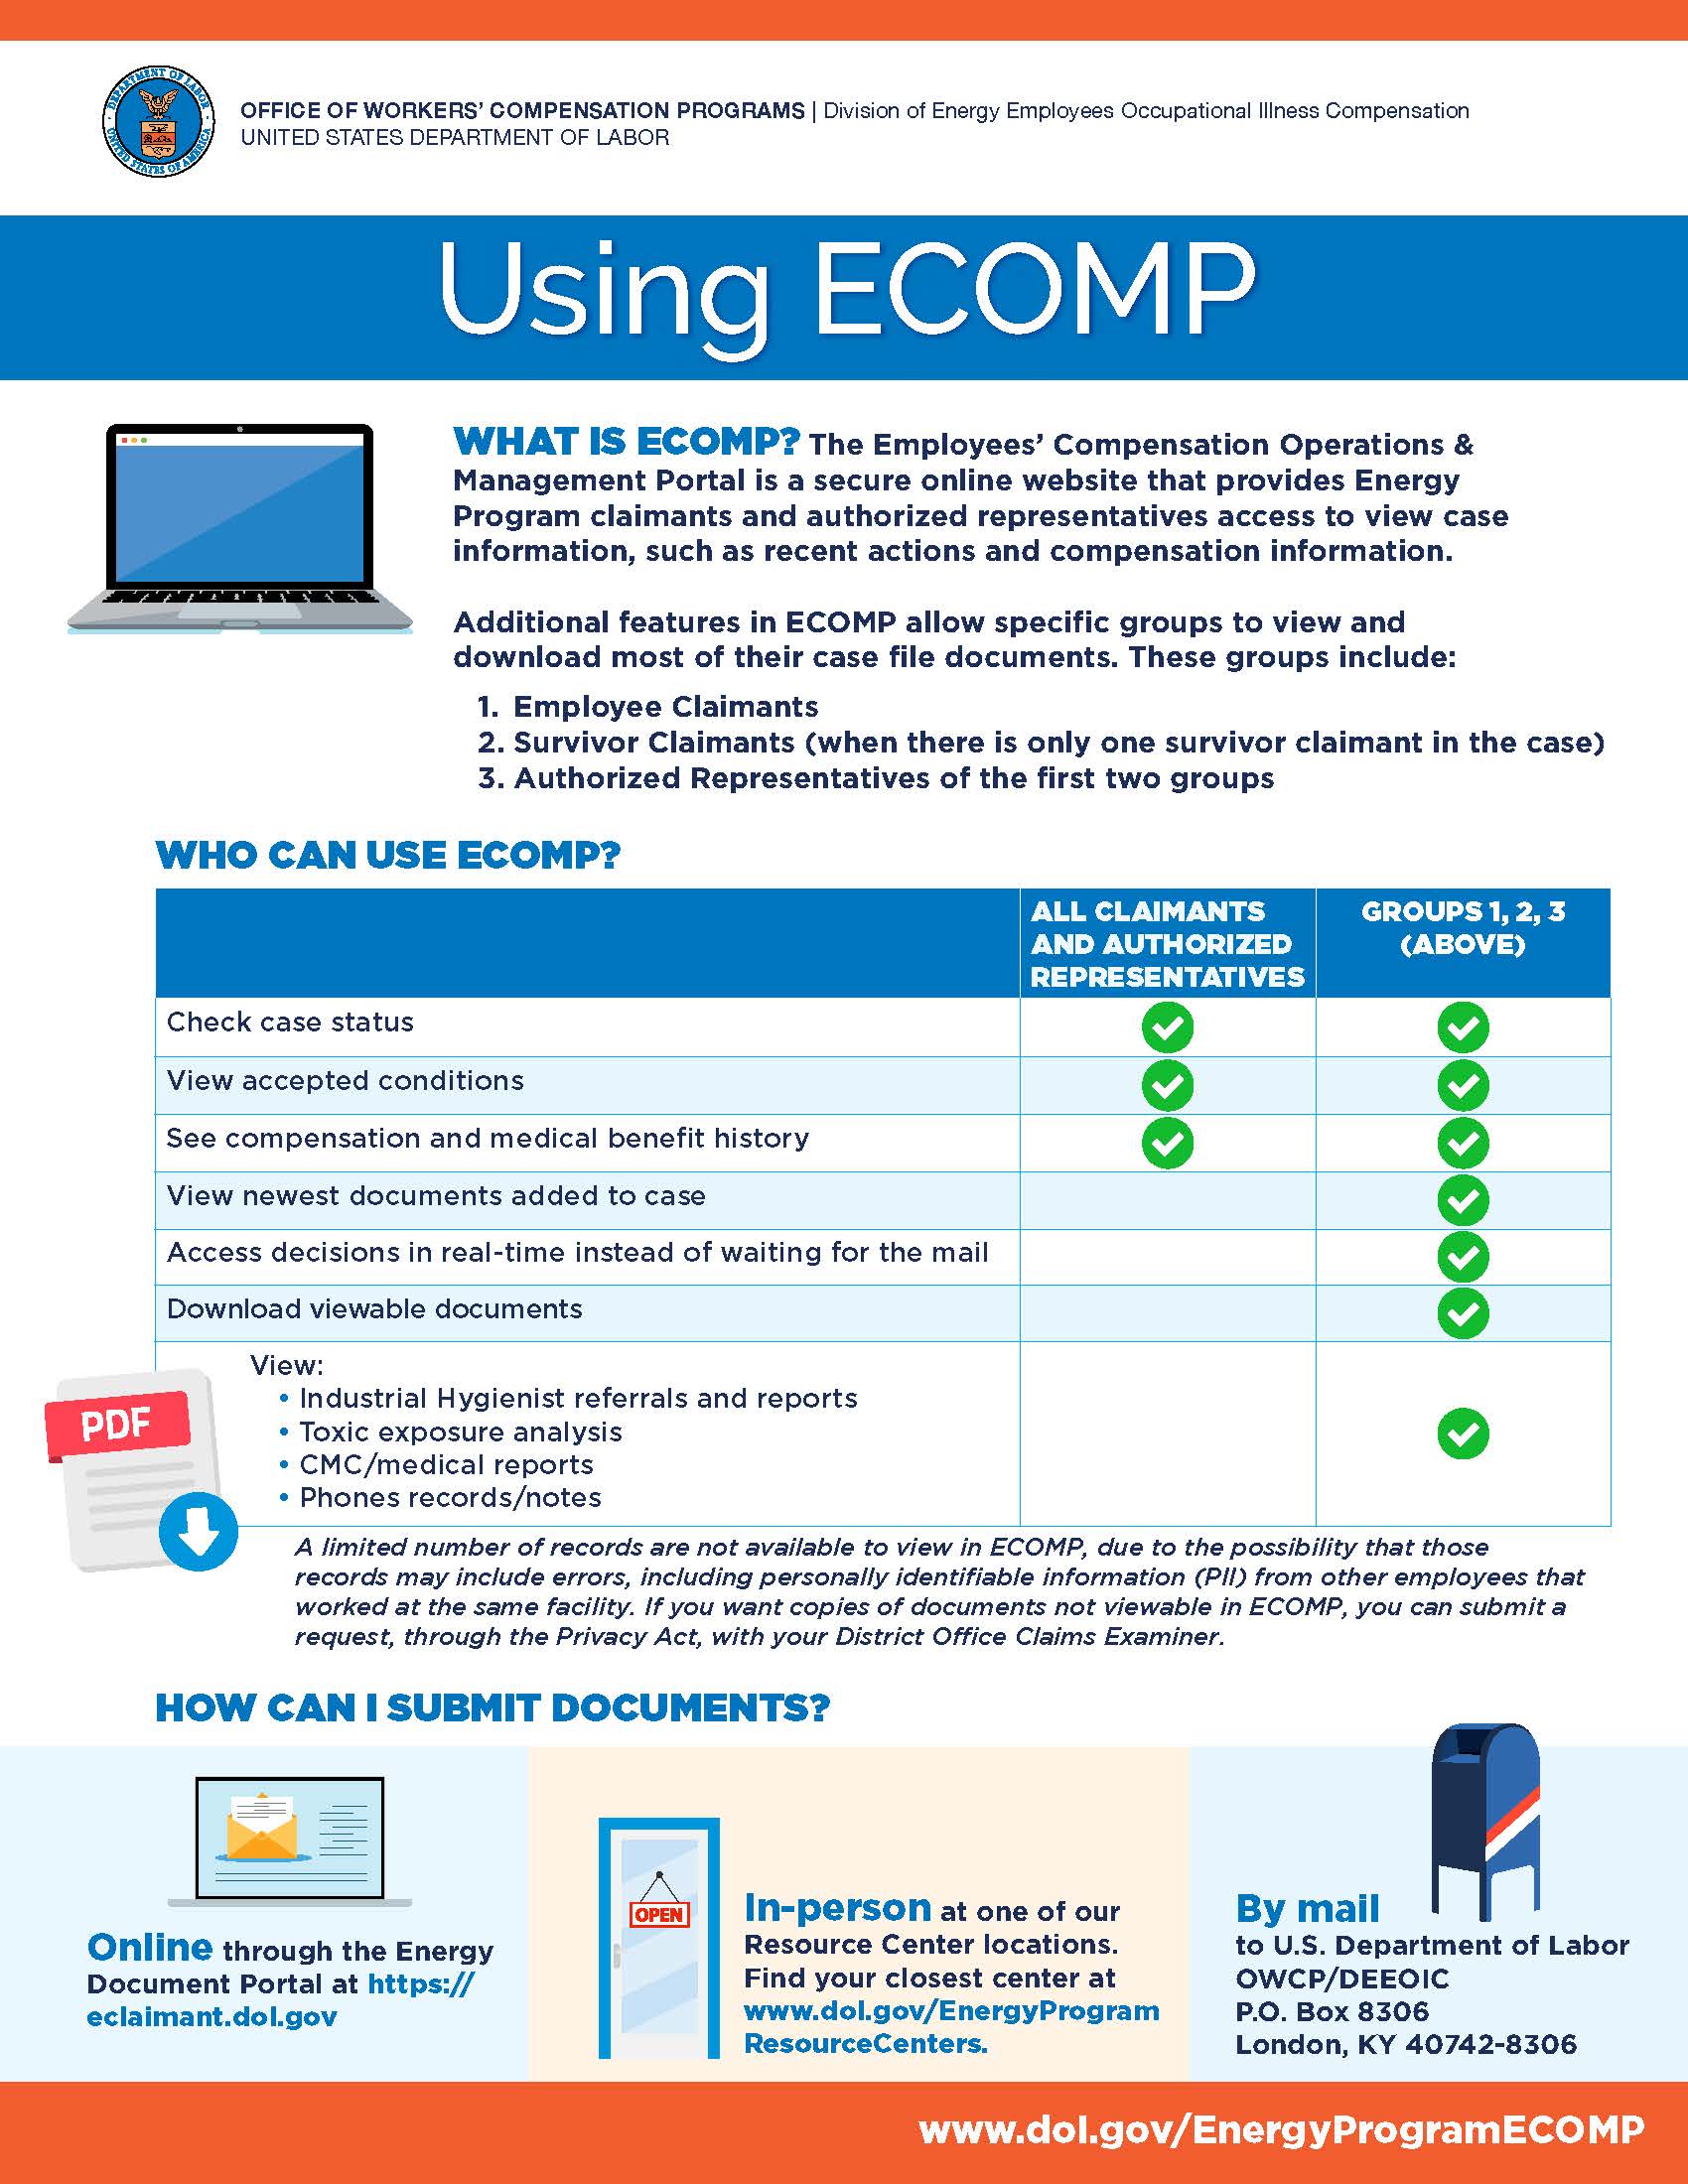 Employees' Compensation Operations & Management Portal (ECOMP) Use and Function (PDF)